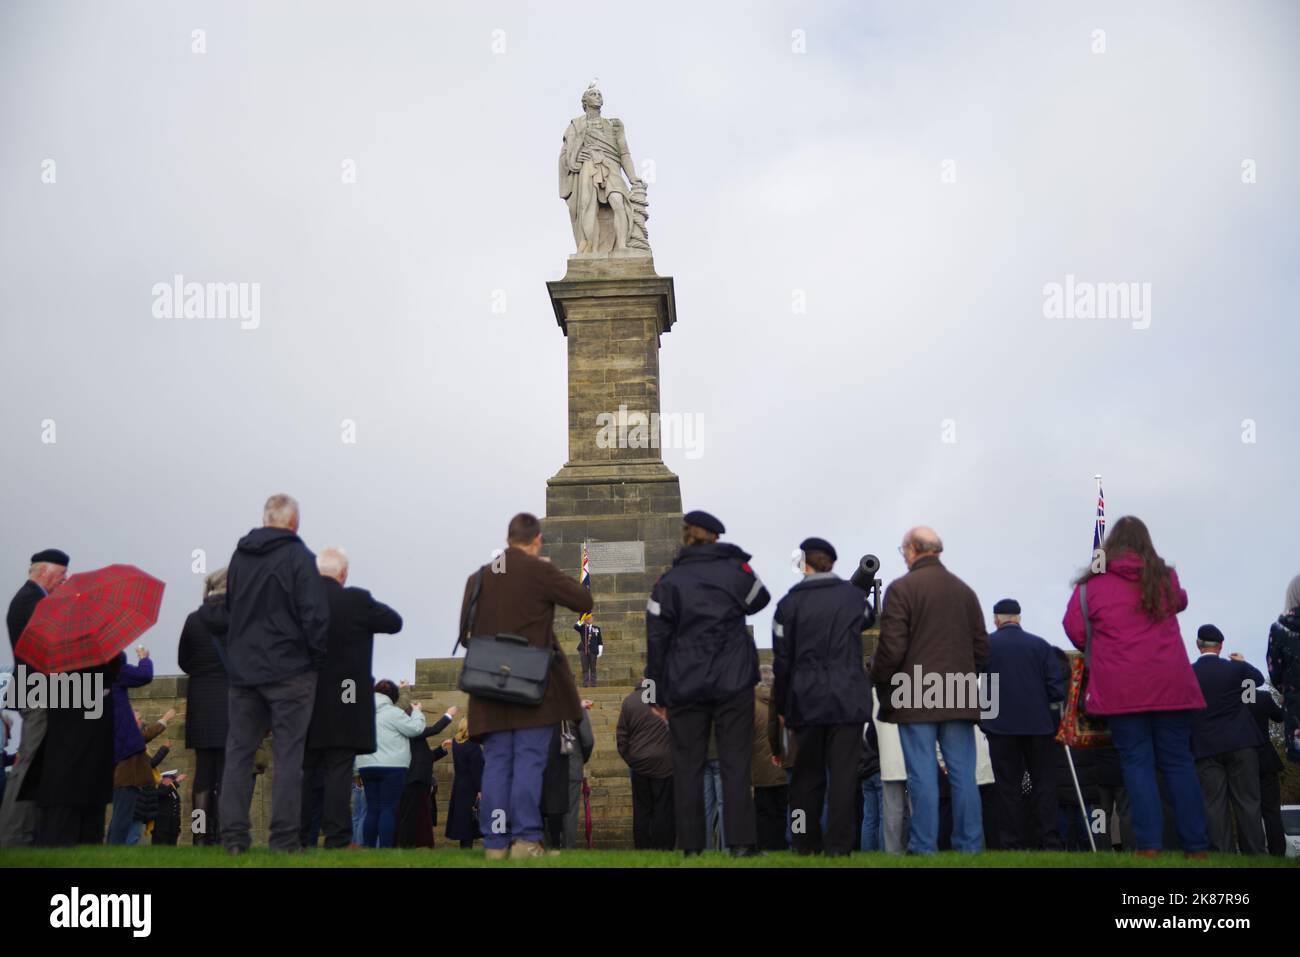 Tynemouth,UK. 21 October 2022. At 12 noon members of the public, invited dignitaries and honoured guests turn to face the monument for the toast marking the time at which the first shot was fired in the Battle of Trafalgar on 21 October 1805. Credit: Colin Edwards/Alamy Live News. Stock Photo